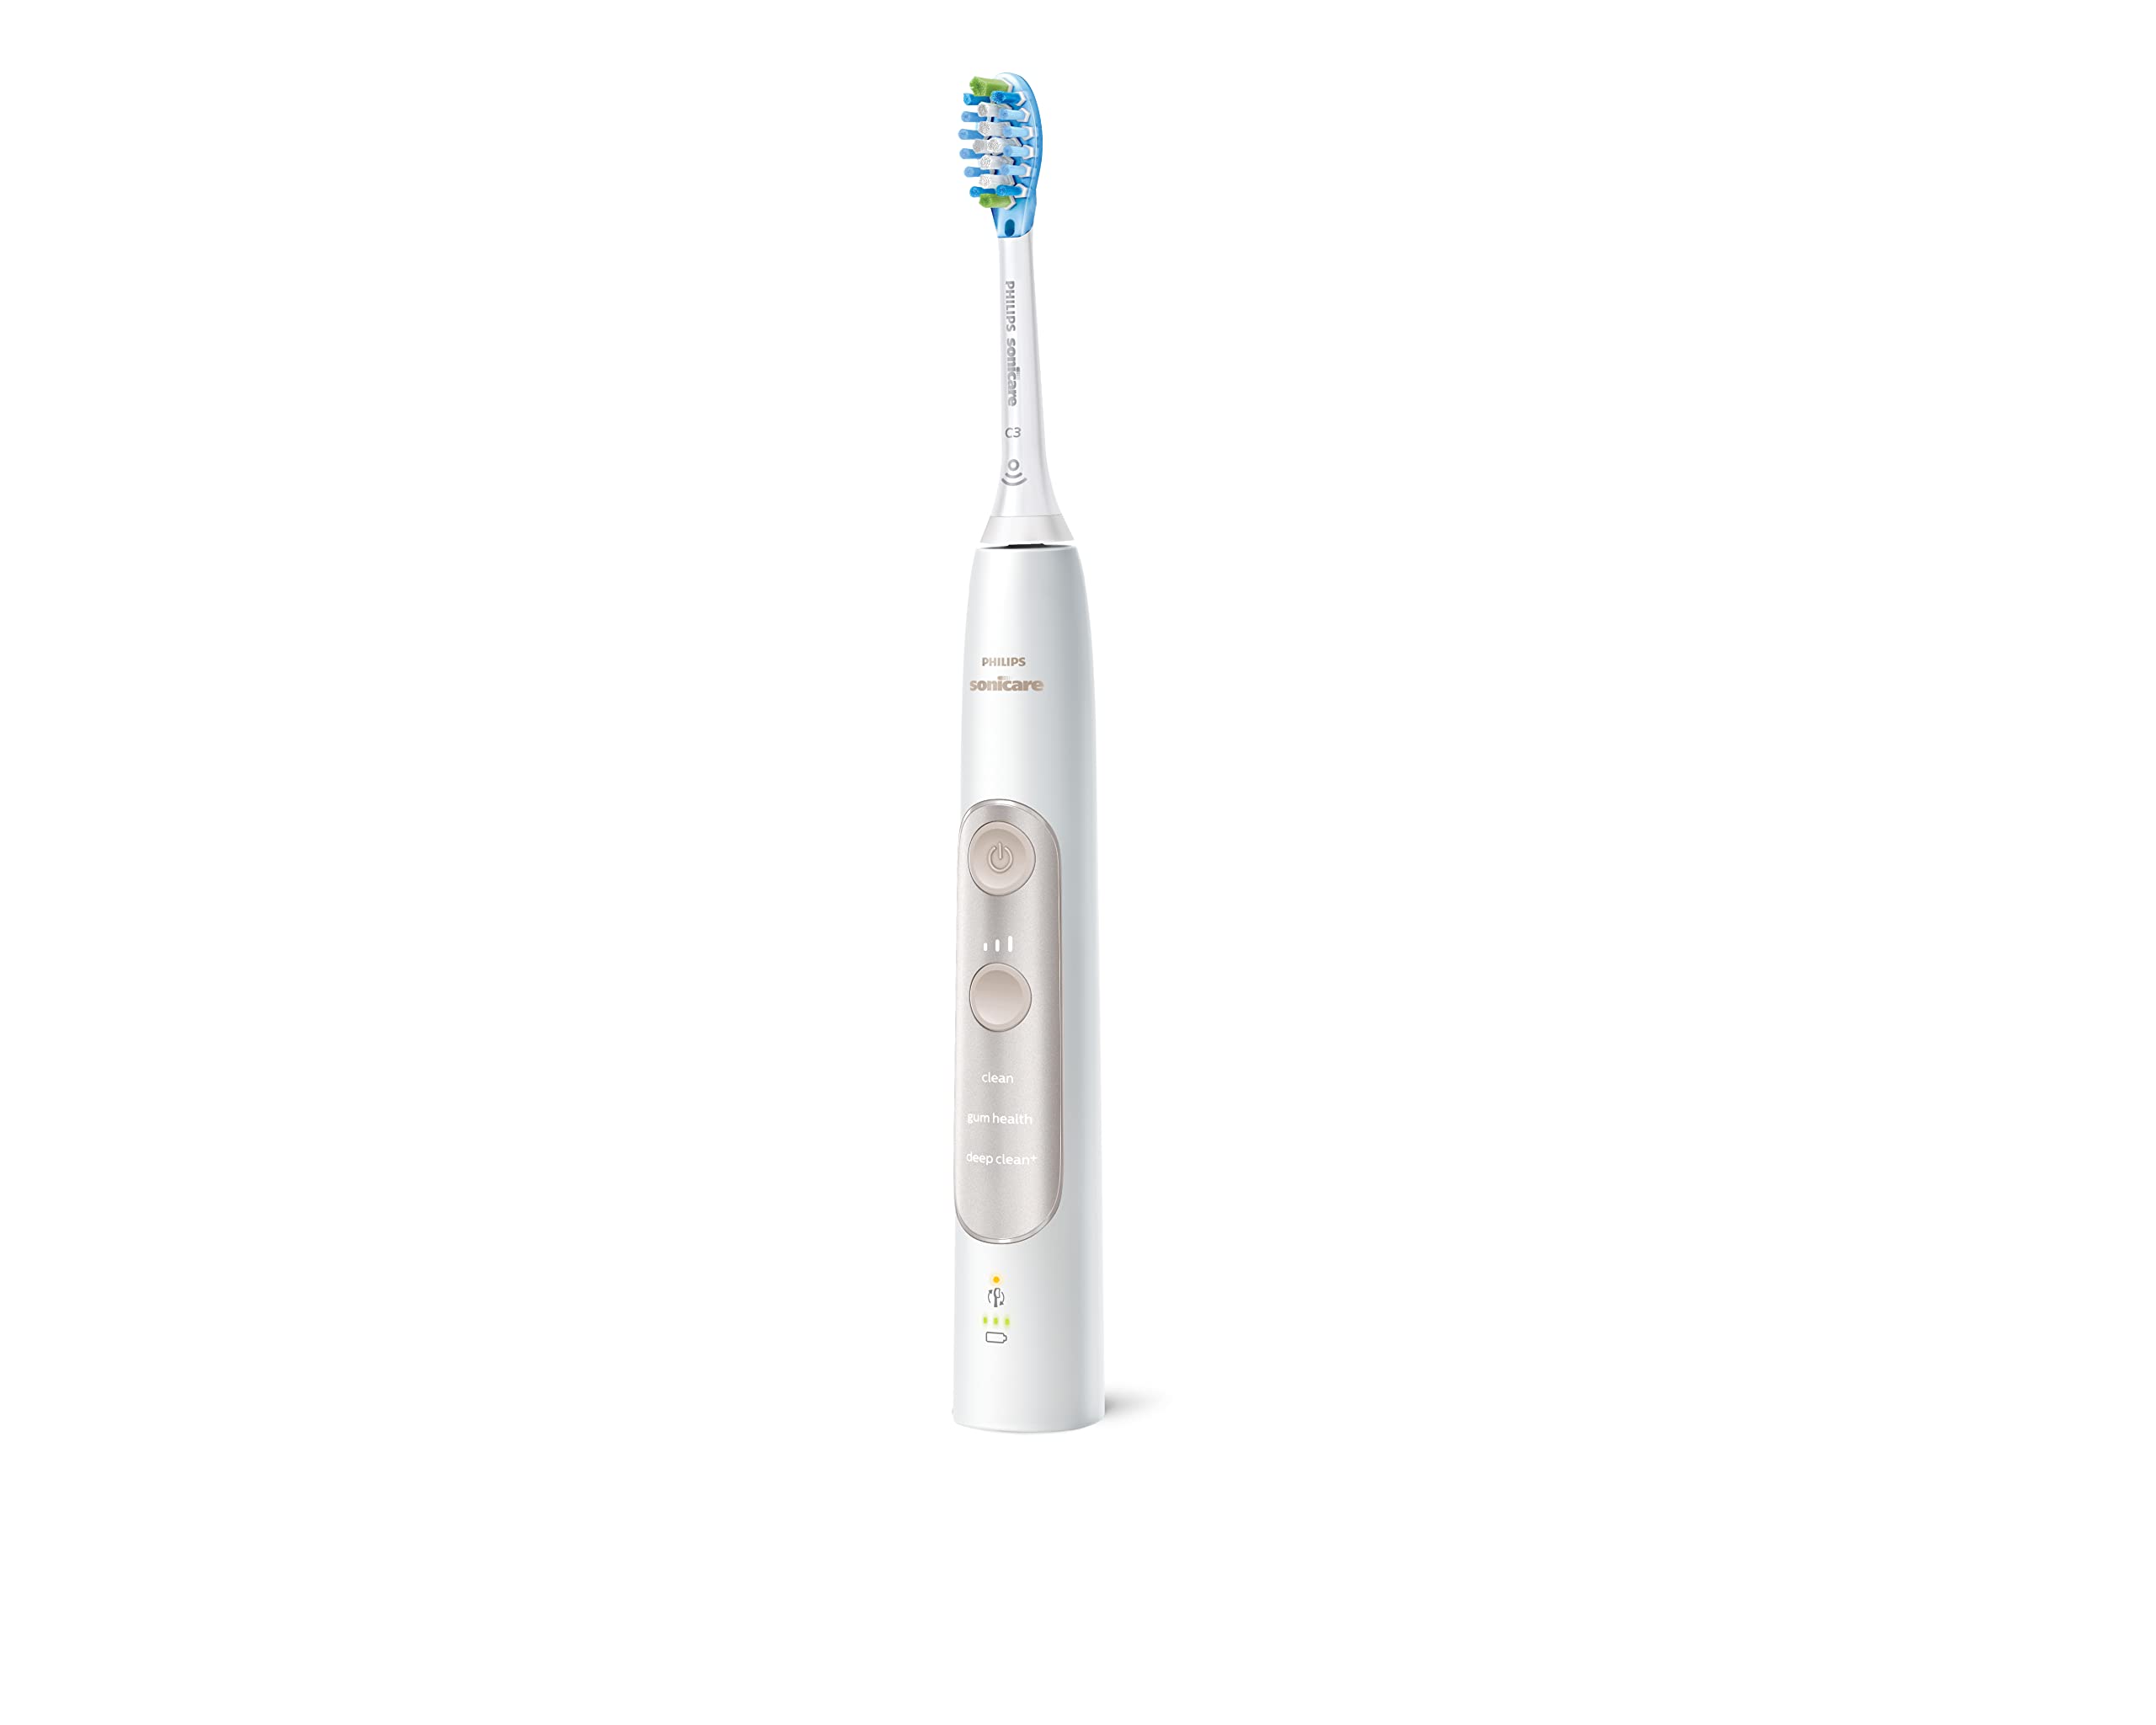 Philips Sonicare Power Flosser & Toothbrush System 7000, HX3921/40